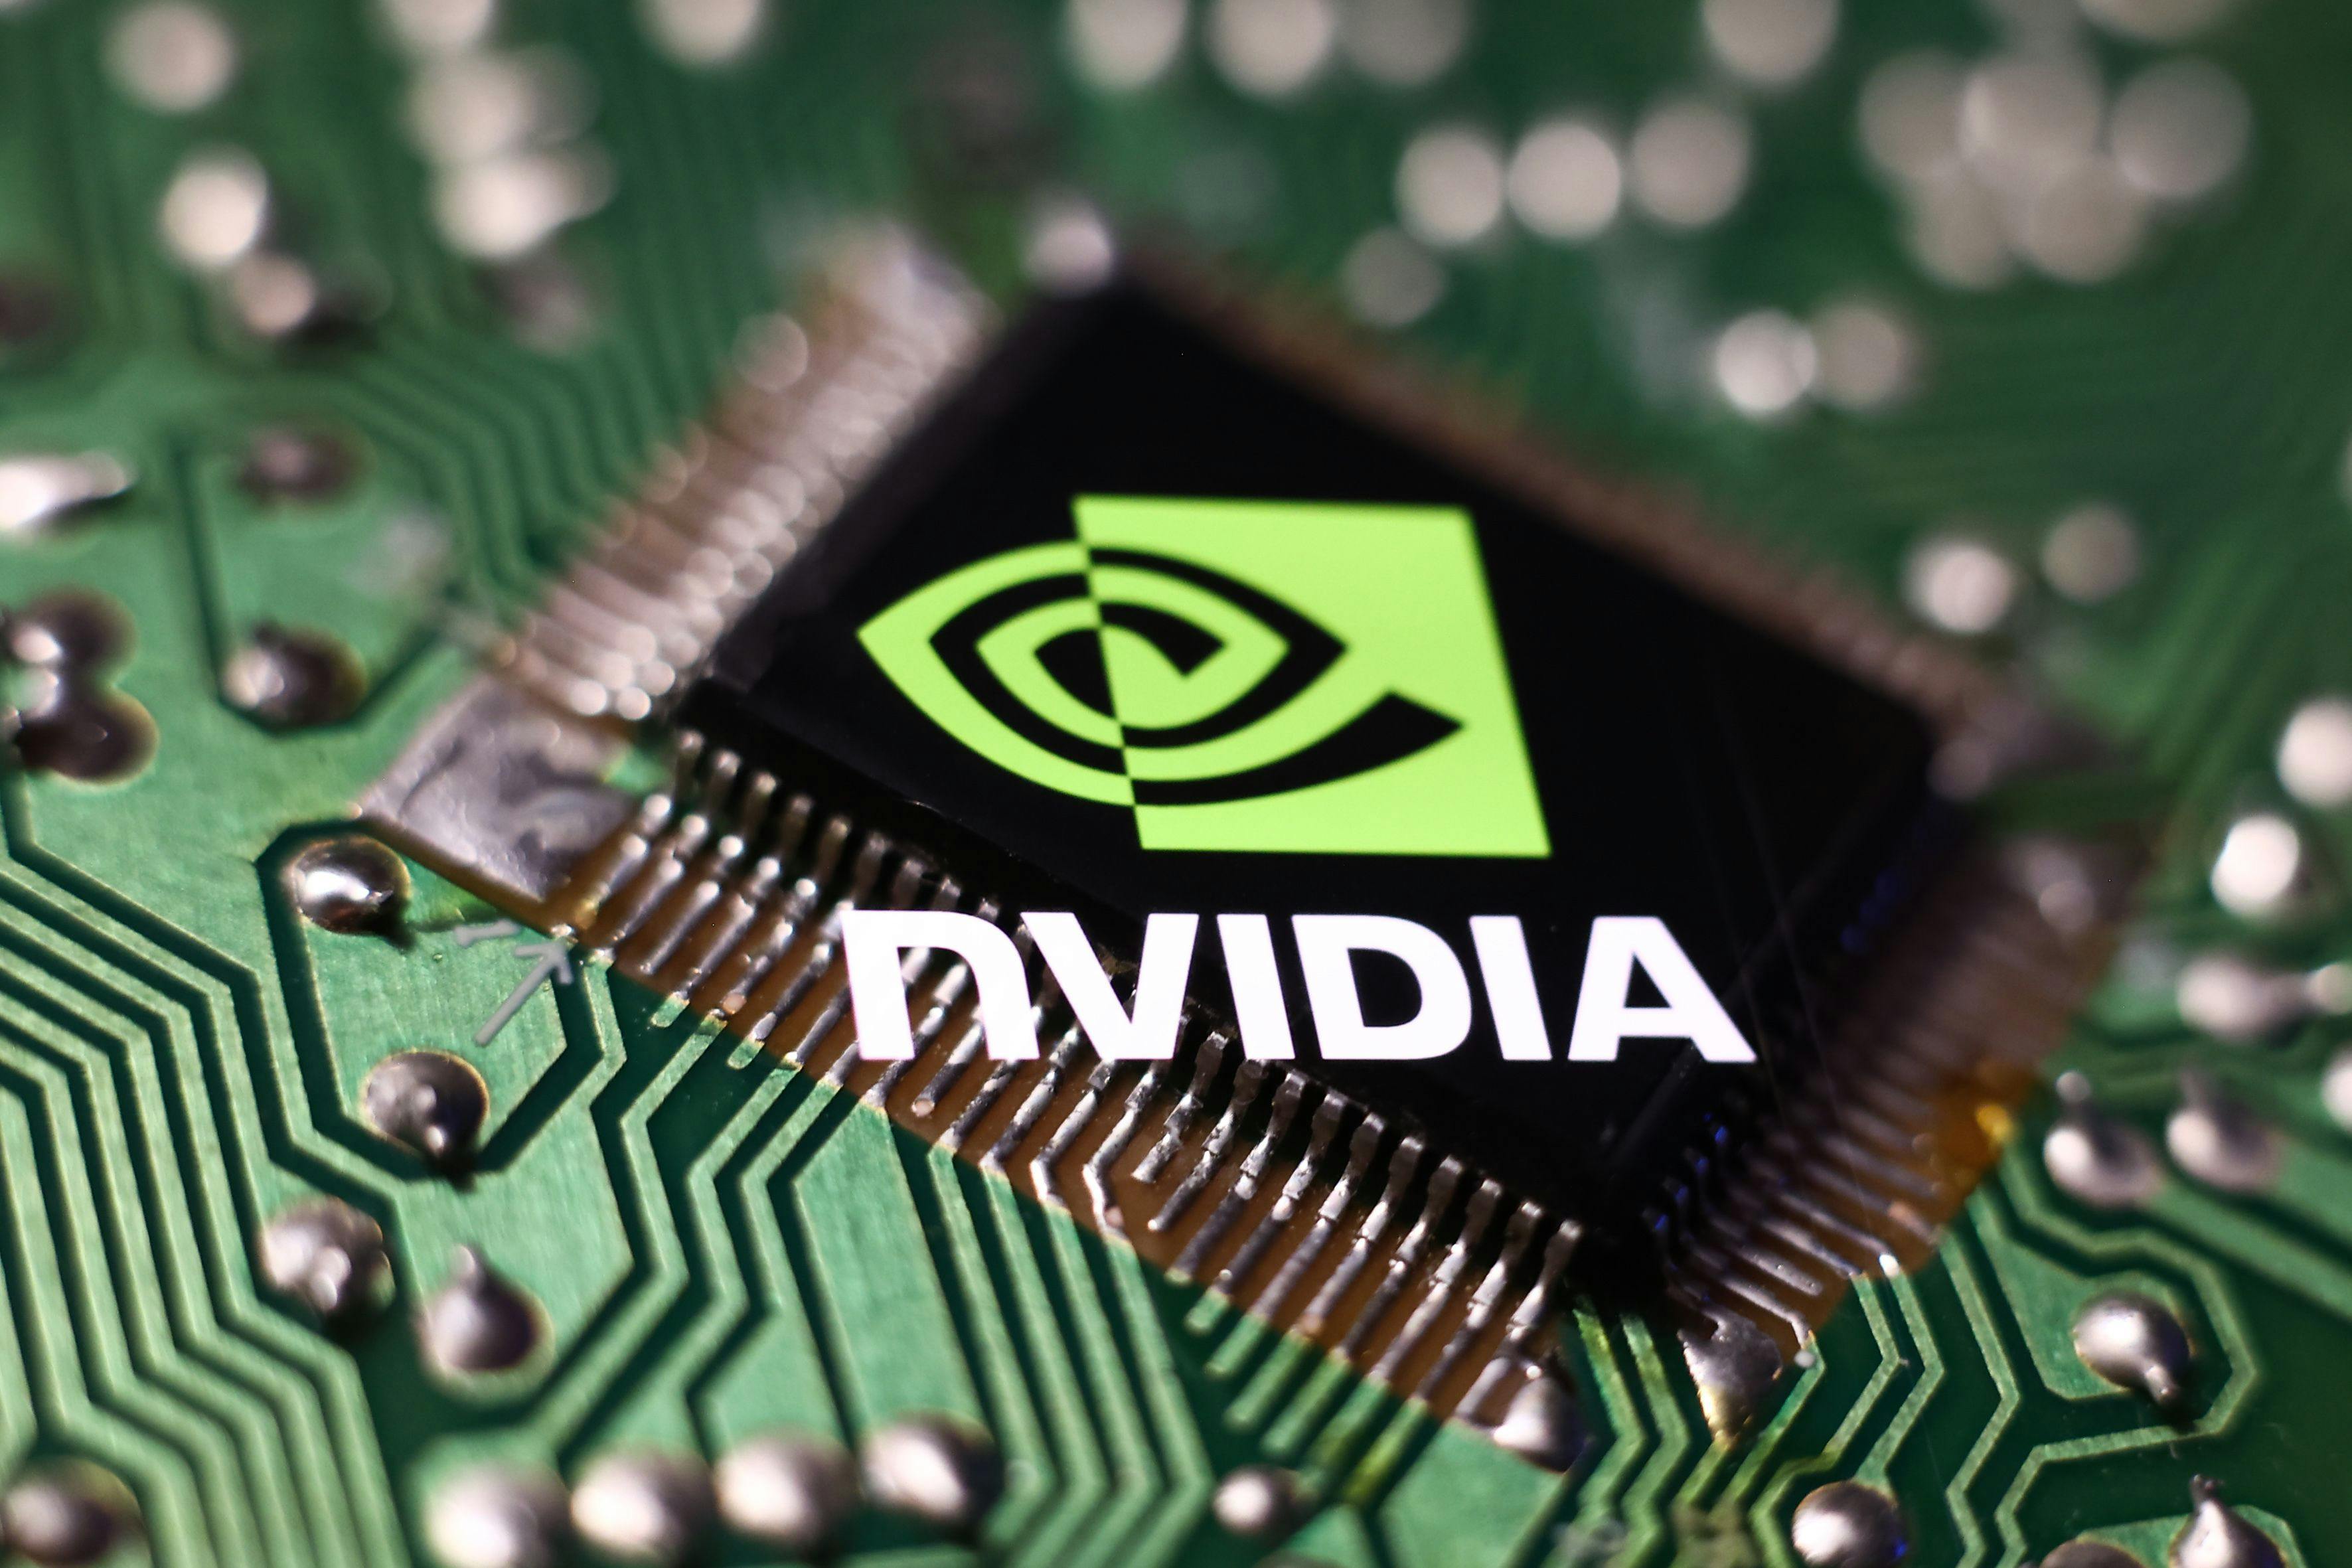 Nvidia logo displayed over microchip